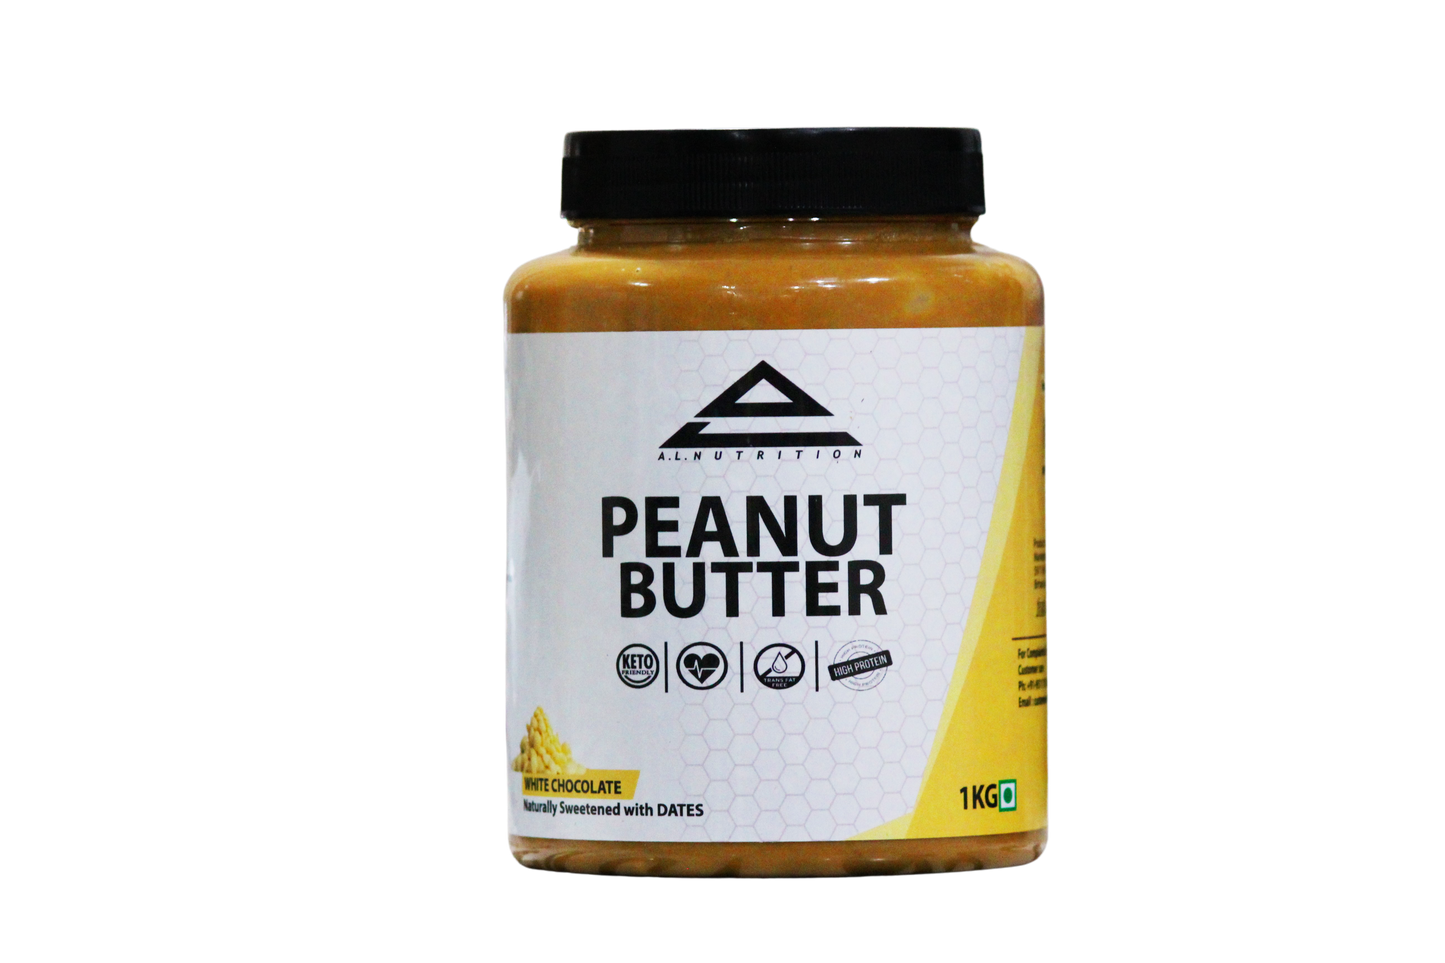 White Chocolate Peanut Butter Sweetened with Dates